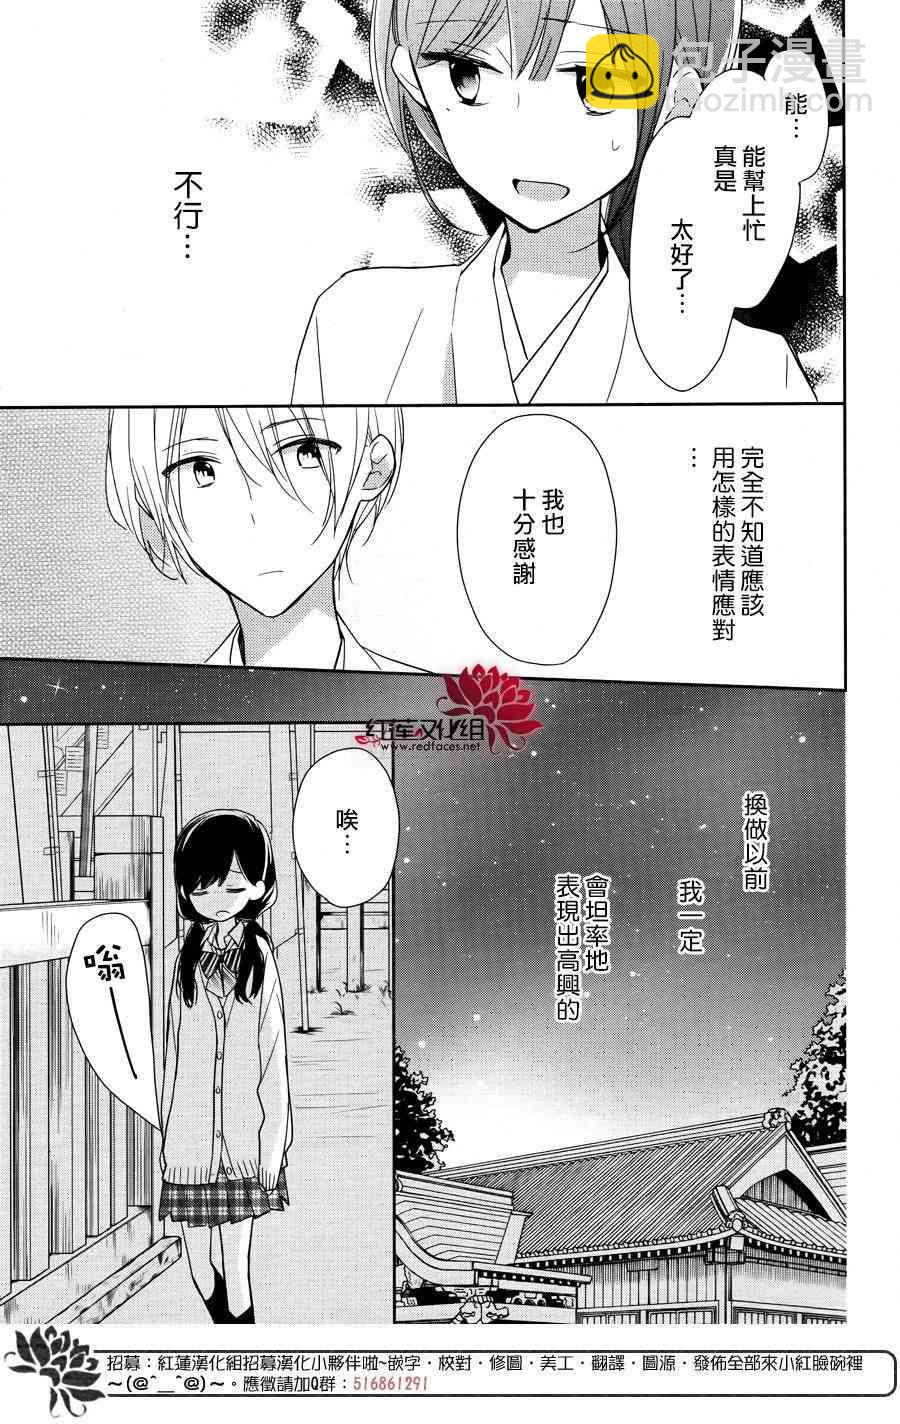 If given a second chance - 1話 - 3